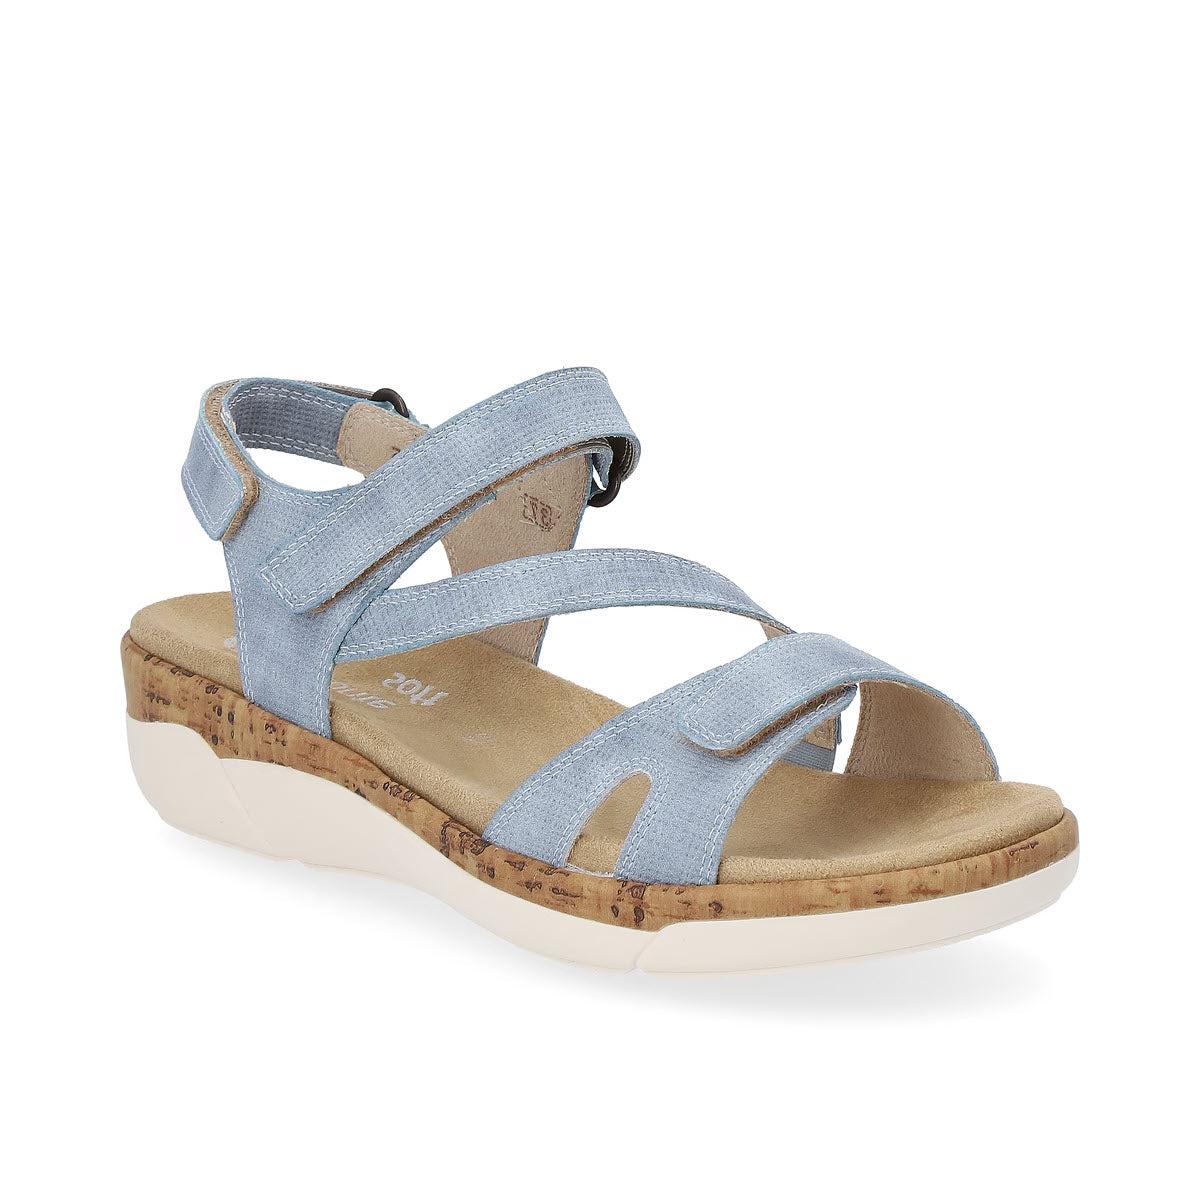 Light blue Remonte Three Strap Adjustable Sandal Jeans - Women's with cork sole and velcro straps displayed on a plain white background.